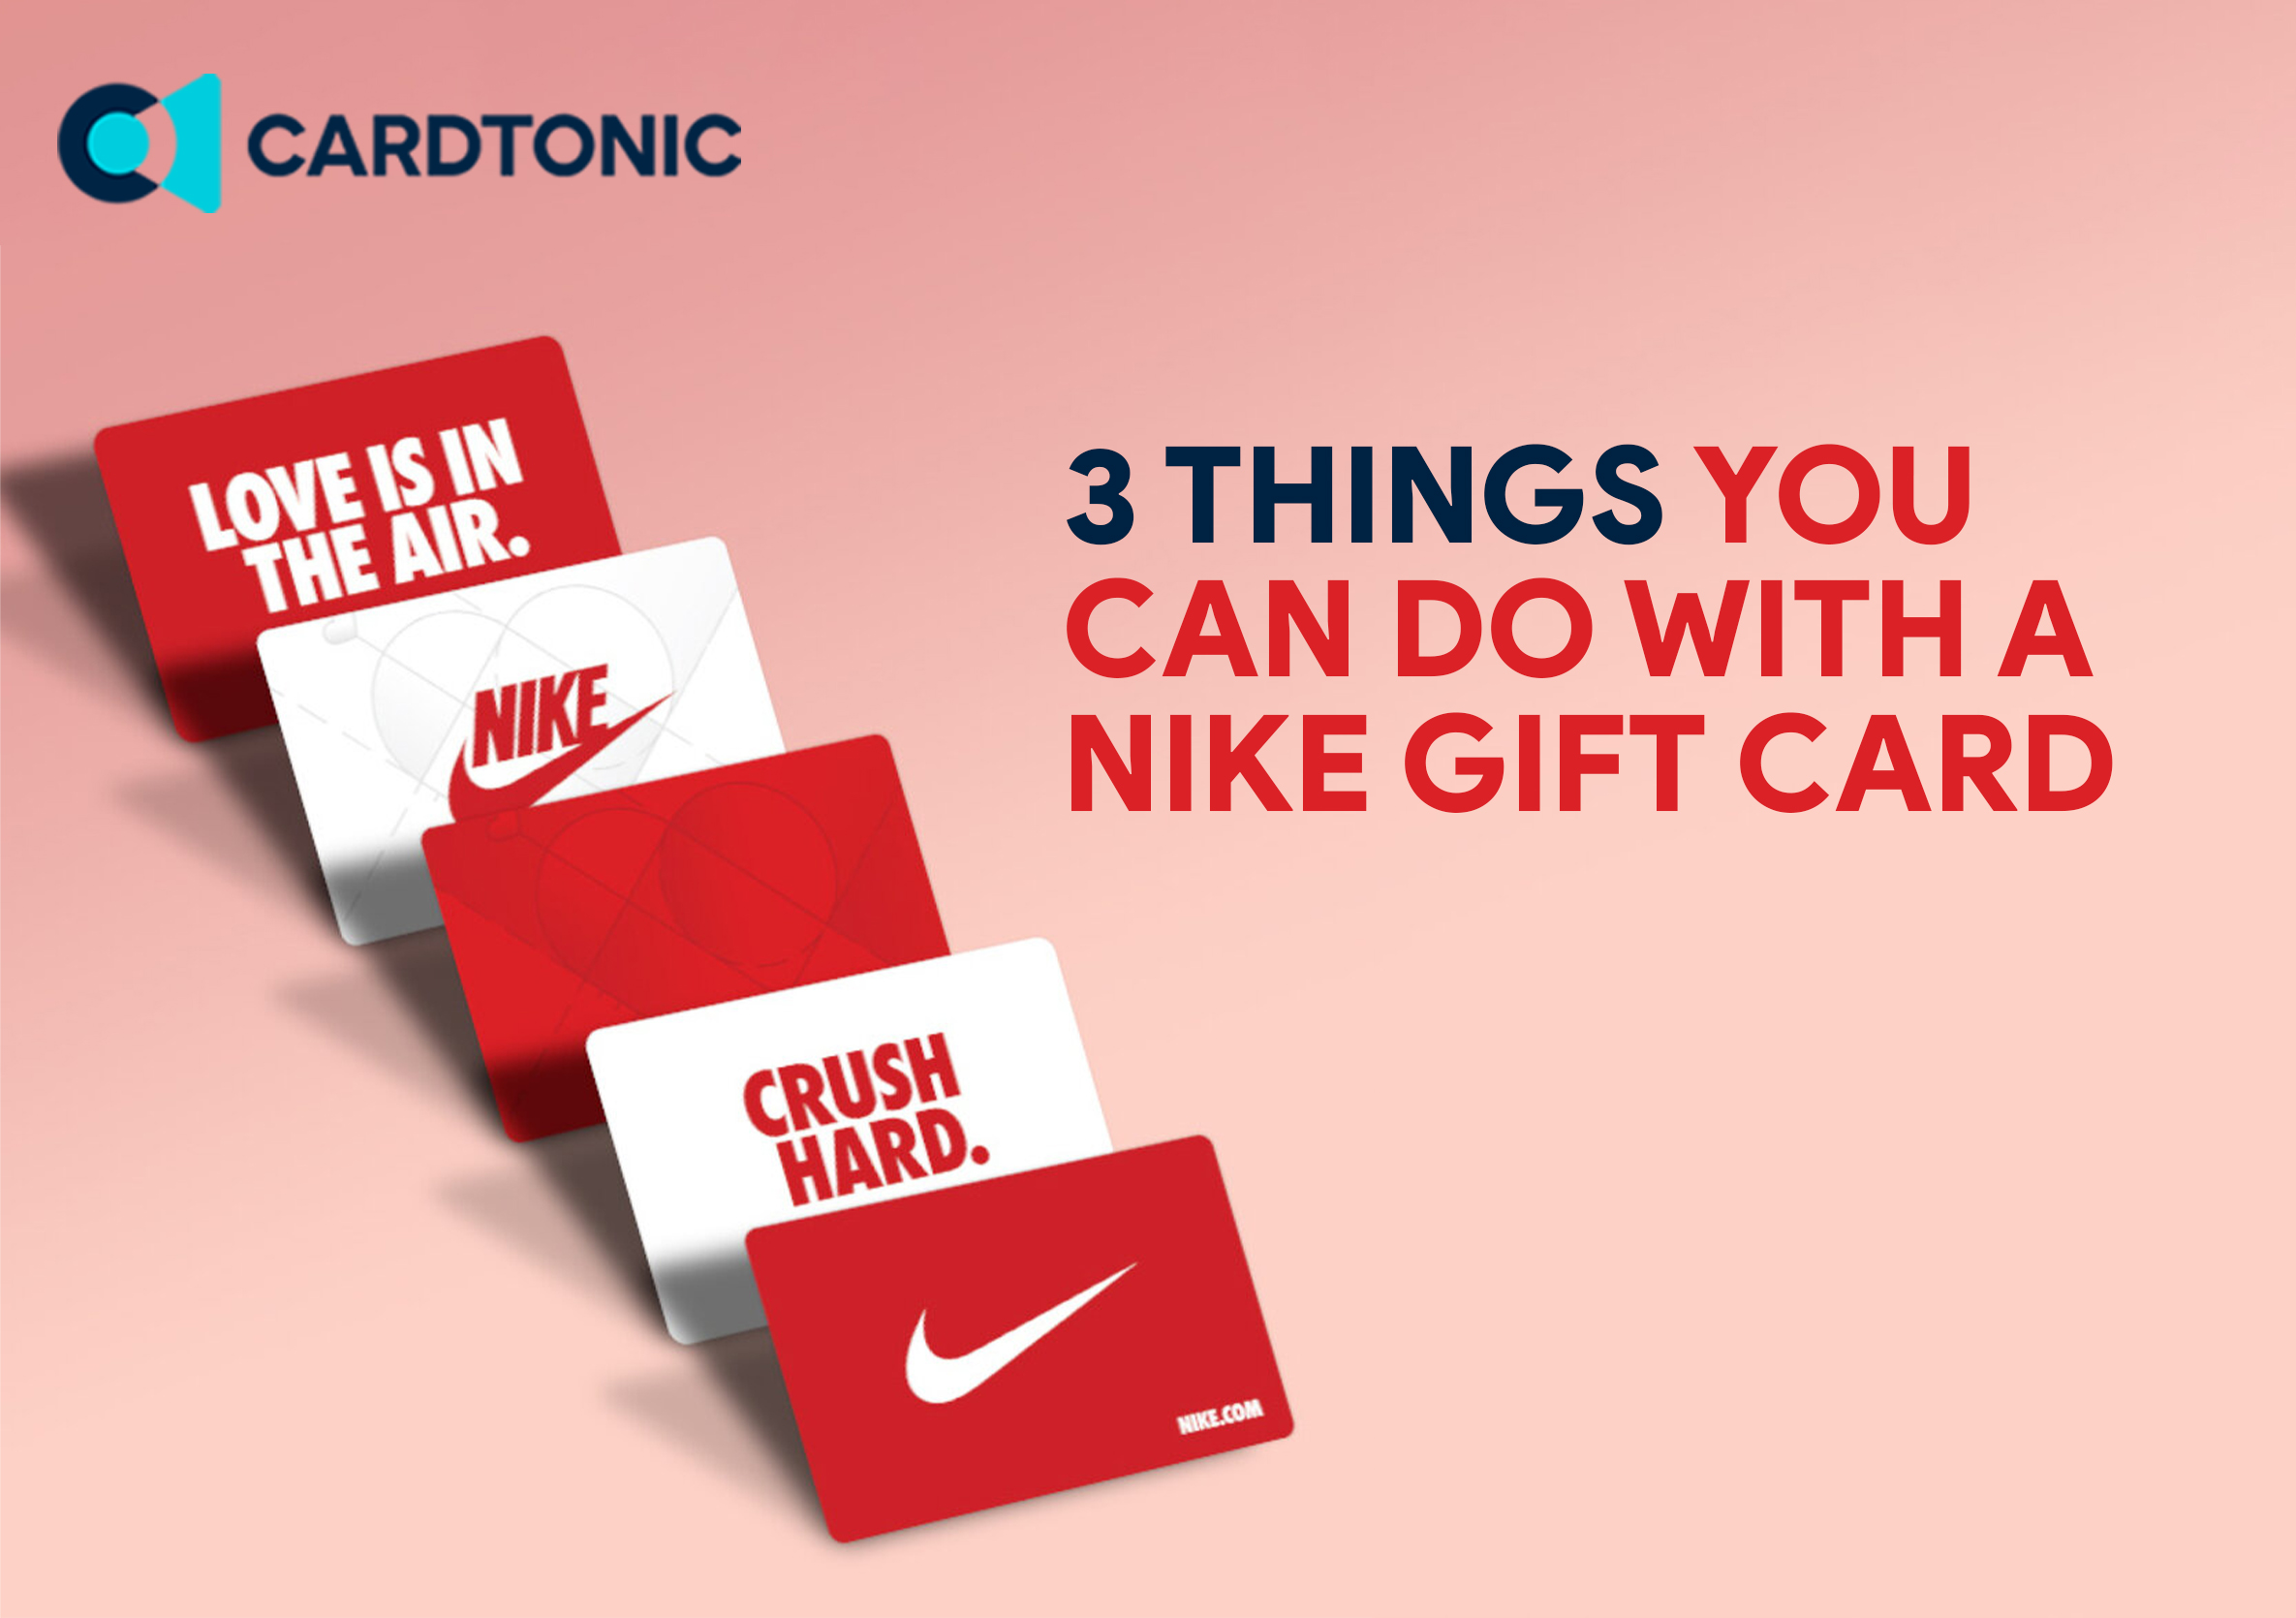 3 Things You Can Do With a Nike Gift Card - Cardtonic